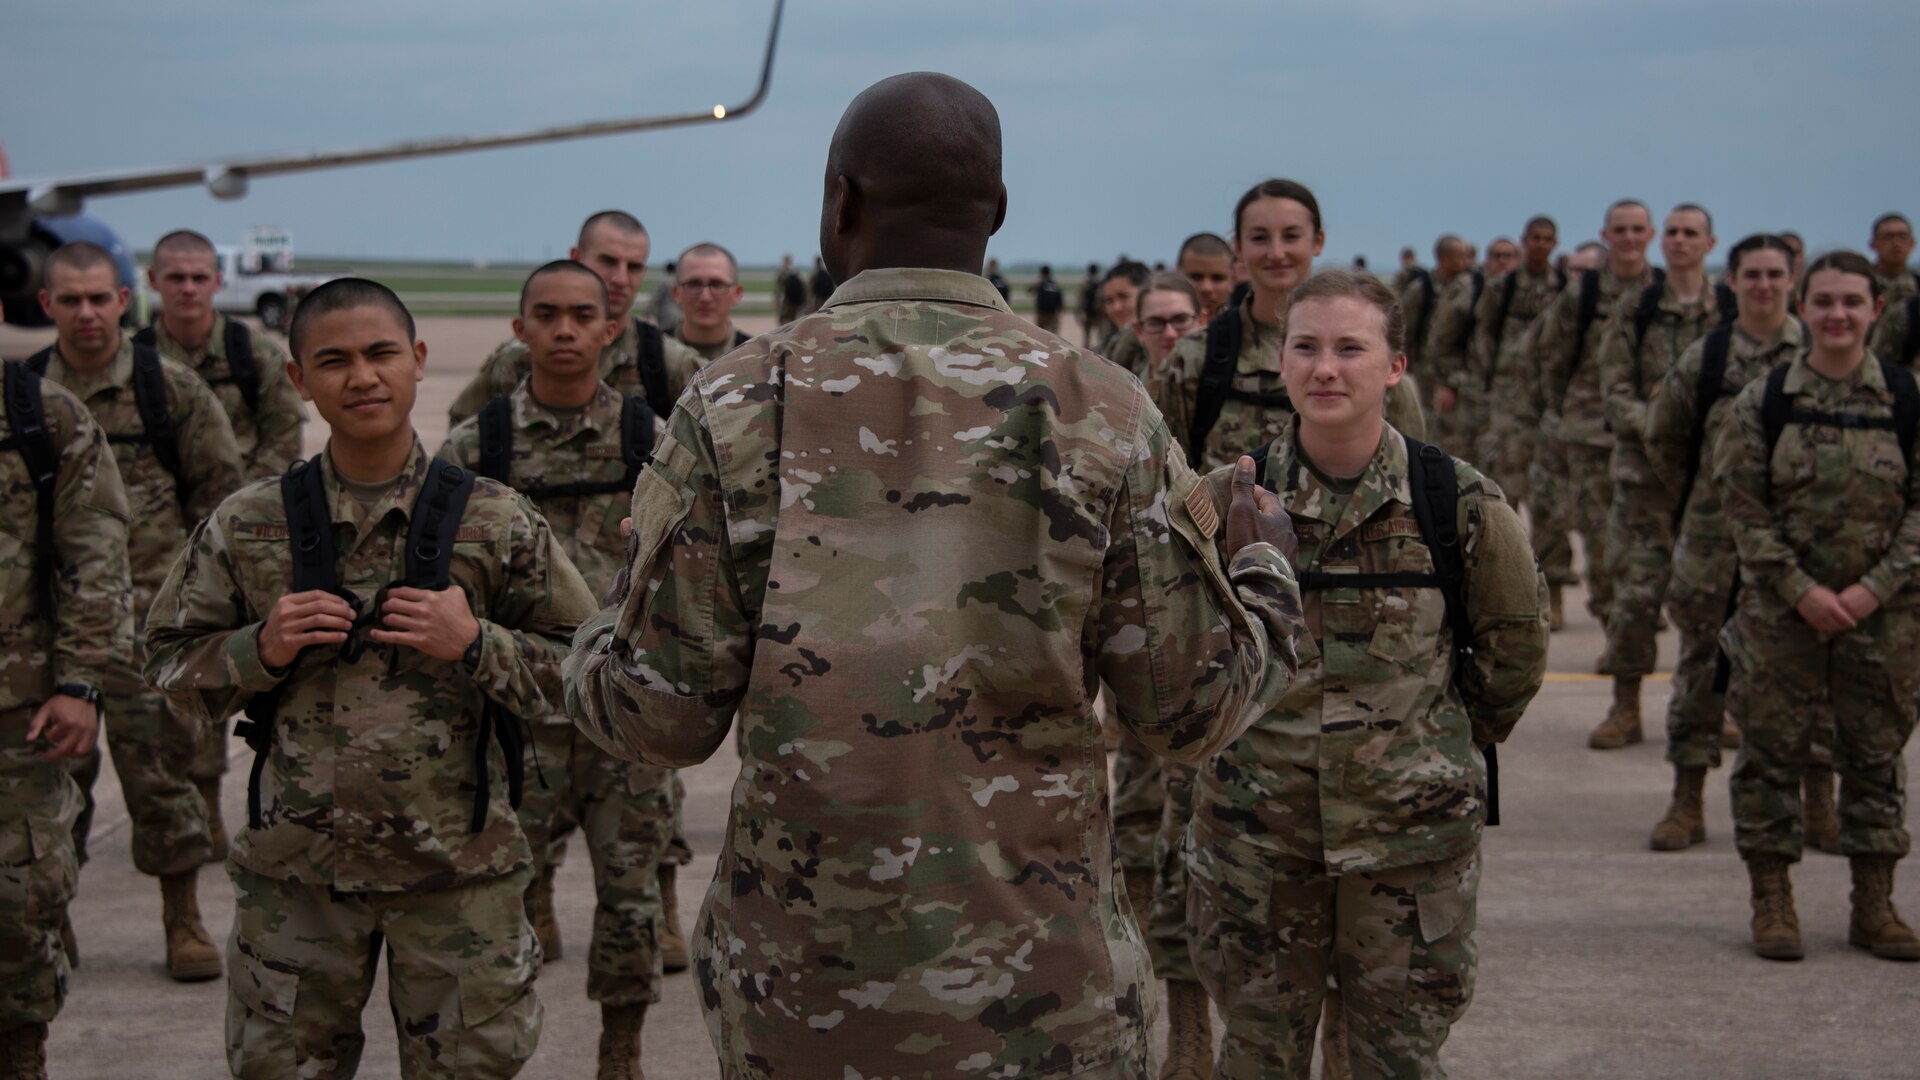 Col. Kenyon Bell, 82nd Training Wing commander, briefs the newest basic military training graduates once they off load from a plane at Sheppard Air Force Base, Texas, March 27, 2020. Bell greeted the newest Airmen by explaining why technical training continues as they are deemed mission essential and thanked the newest Airmen for their commitment to the Air Force. (U.S. Air Force photo by Senior Airman Pedro Tenorio)